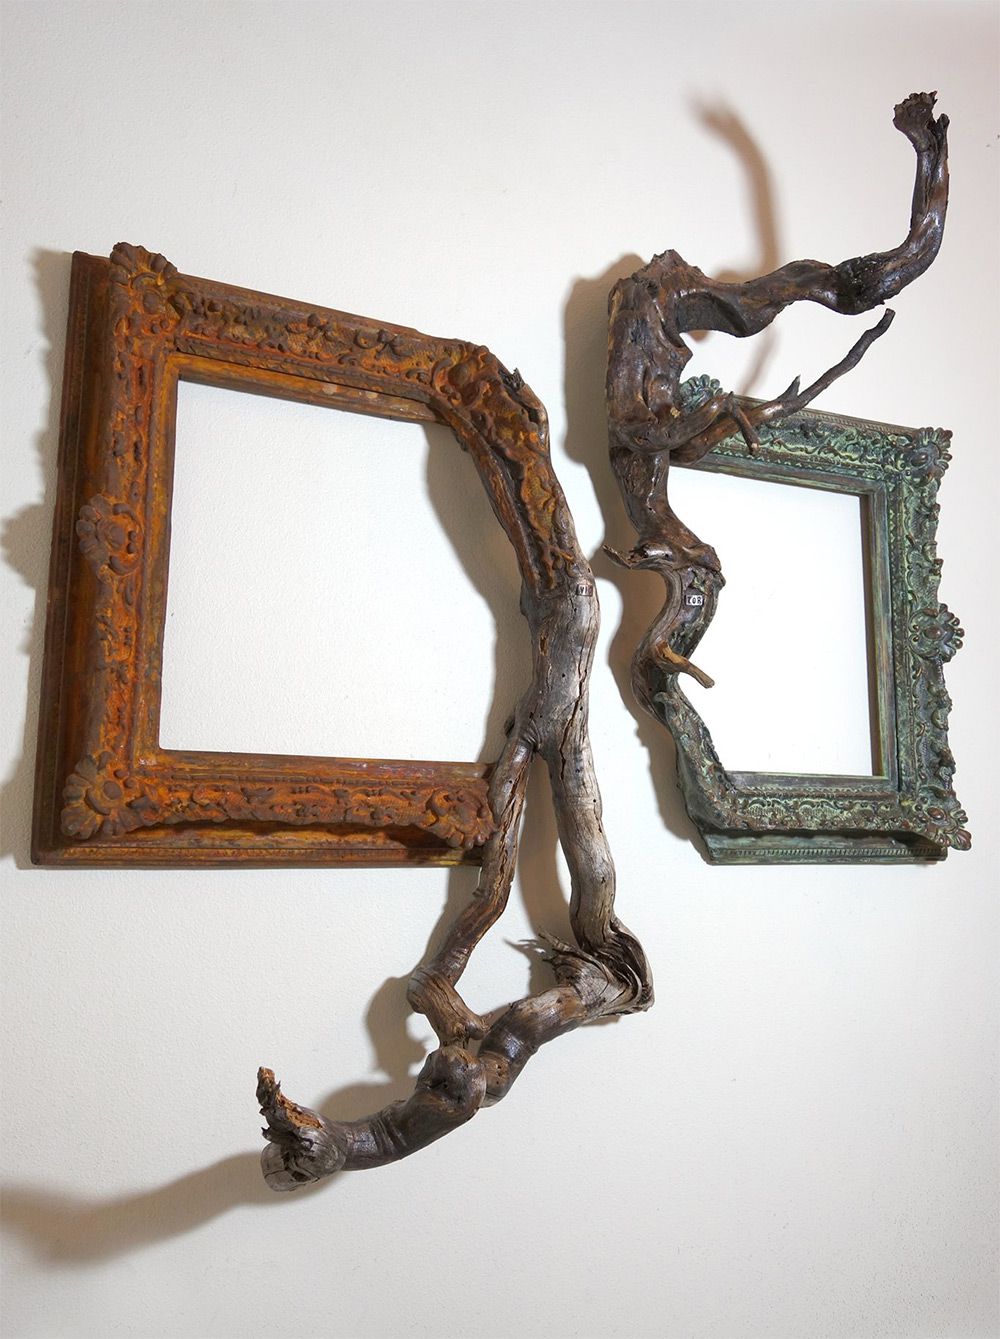 Tree Roots And Branches Fused With Ornate Picture Frames By Darryl Cox 6